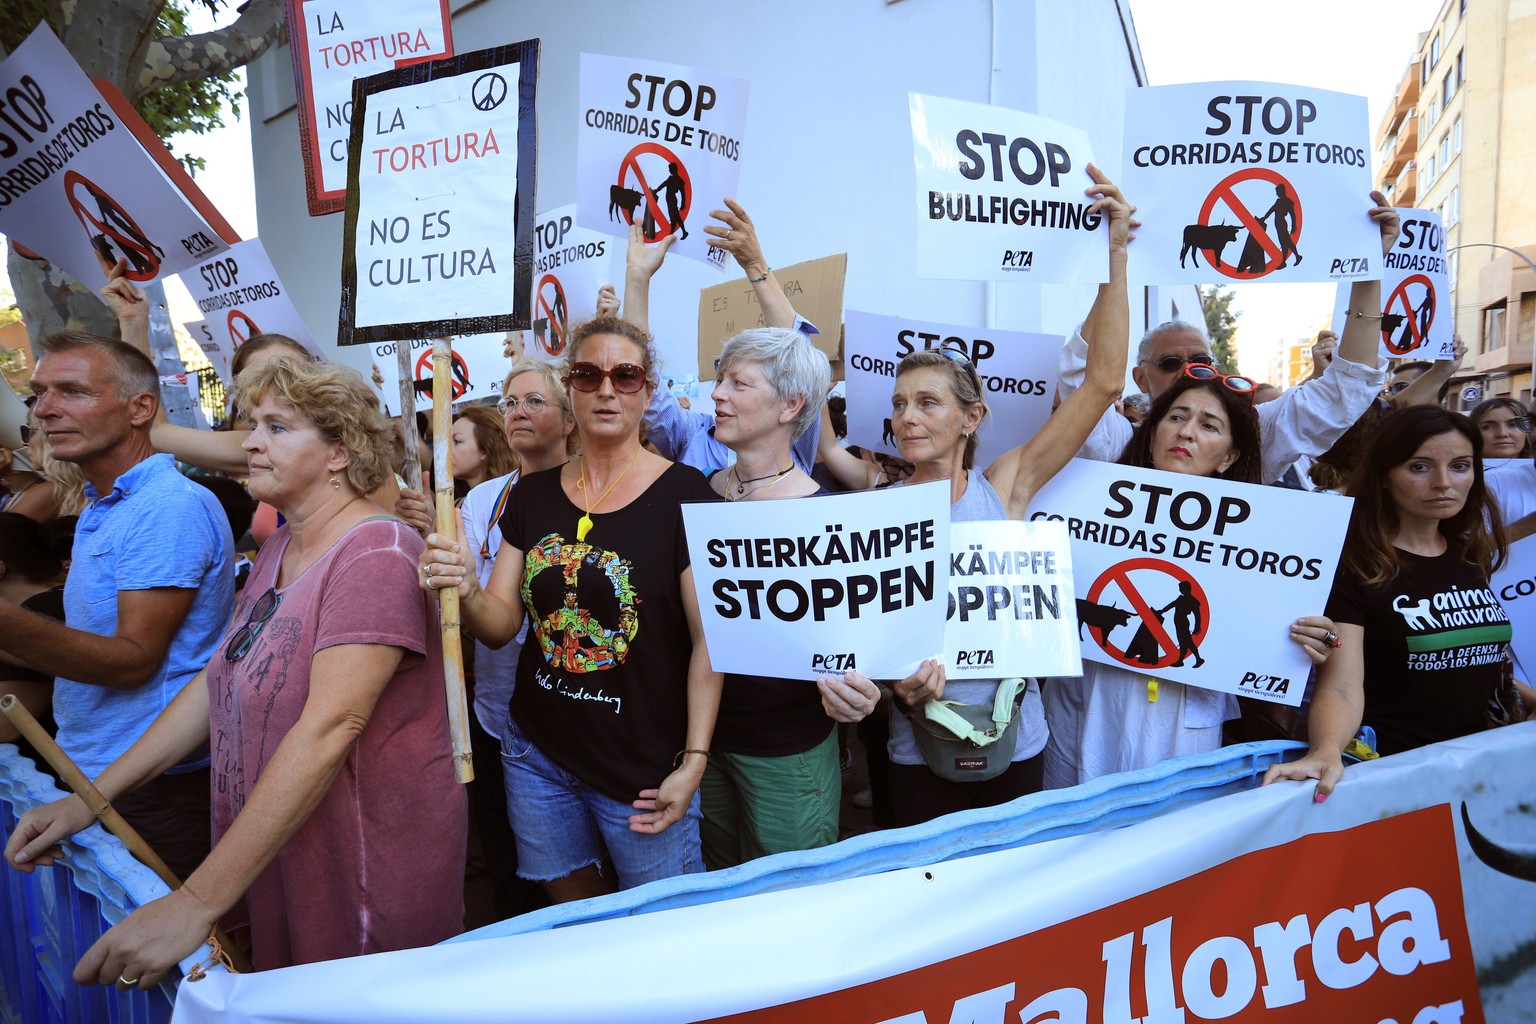 epa07764885 People attend a protest against bullfighting in Palma de Mallorca, Balearic Islands, Spain, 09 August 2019, on occasion of a bullfight held at the Coliseo Balear bullring. EPA/LLITERES